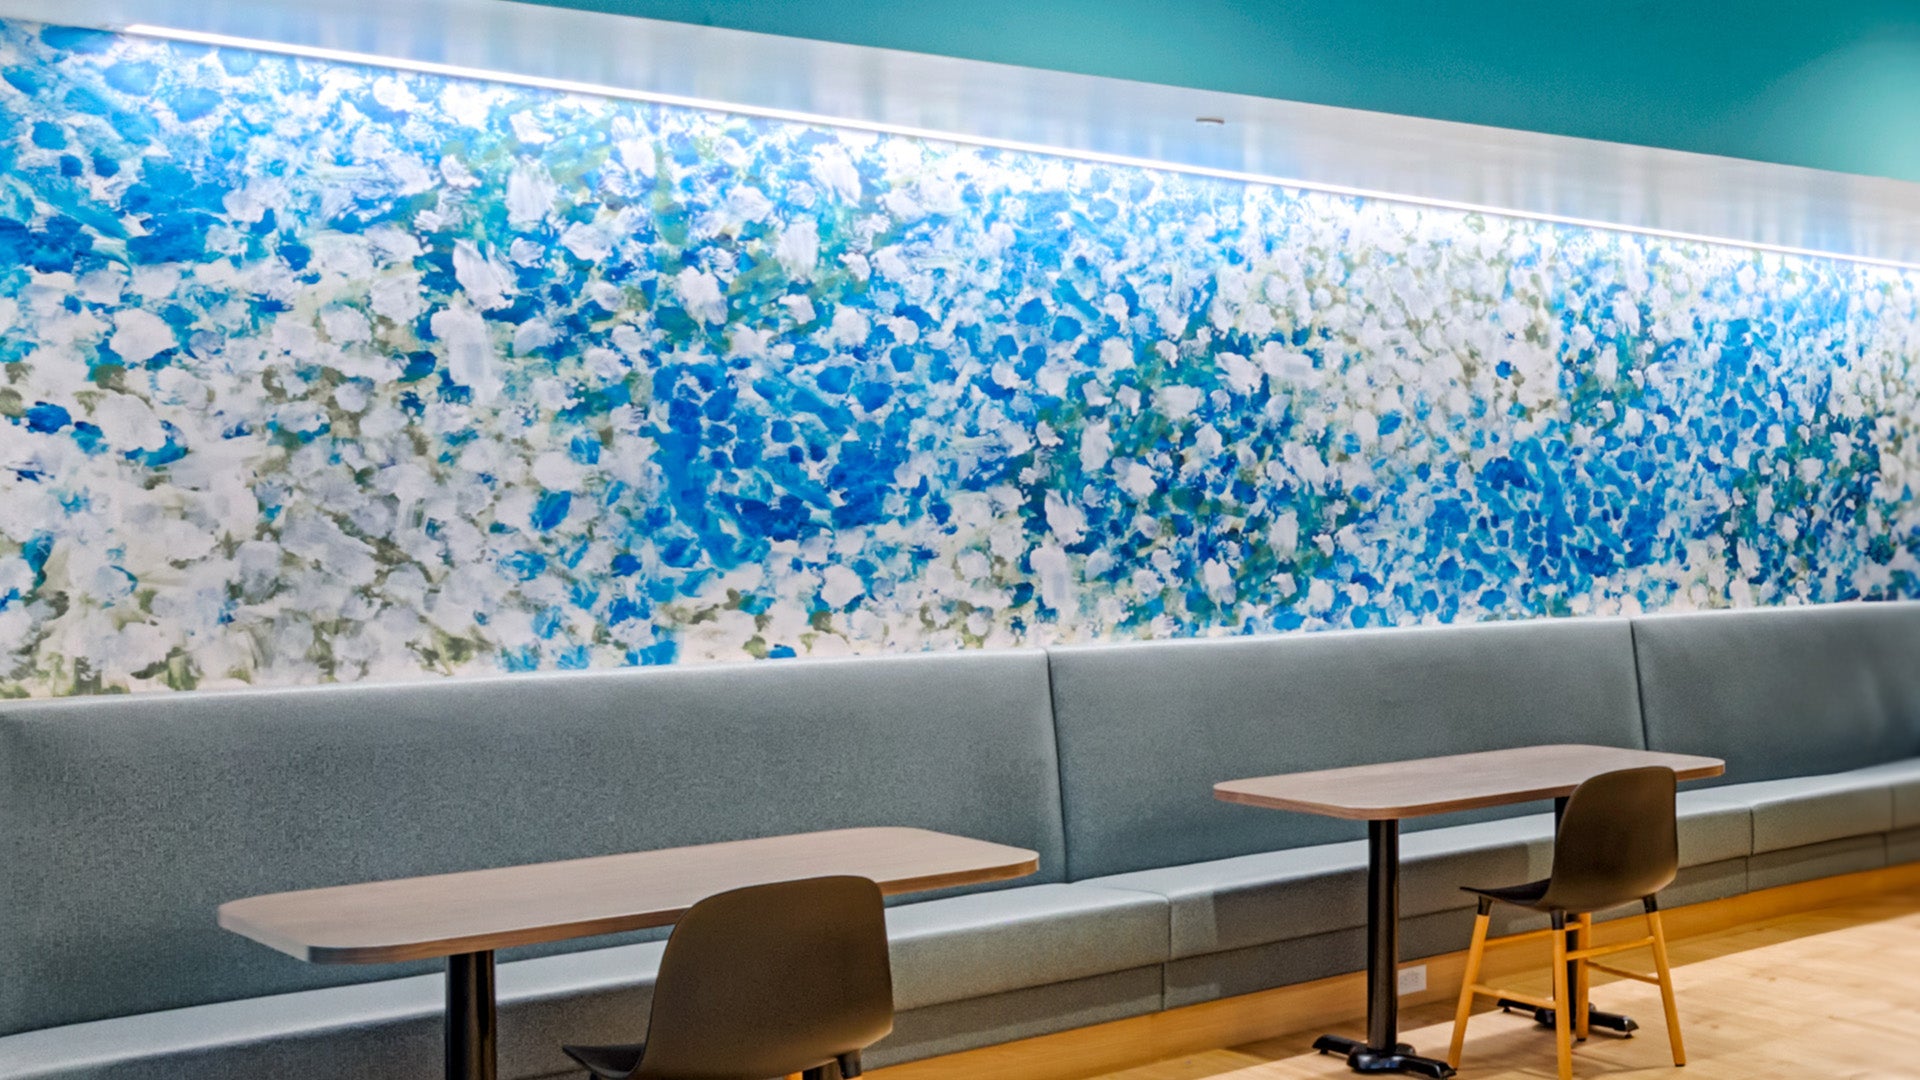 An abstract blue, white, and green painting by Mia Brown is reproduced as a wallcovering installed above a long bench in a cafe area in a tech office.